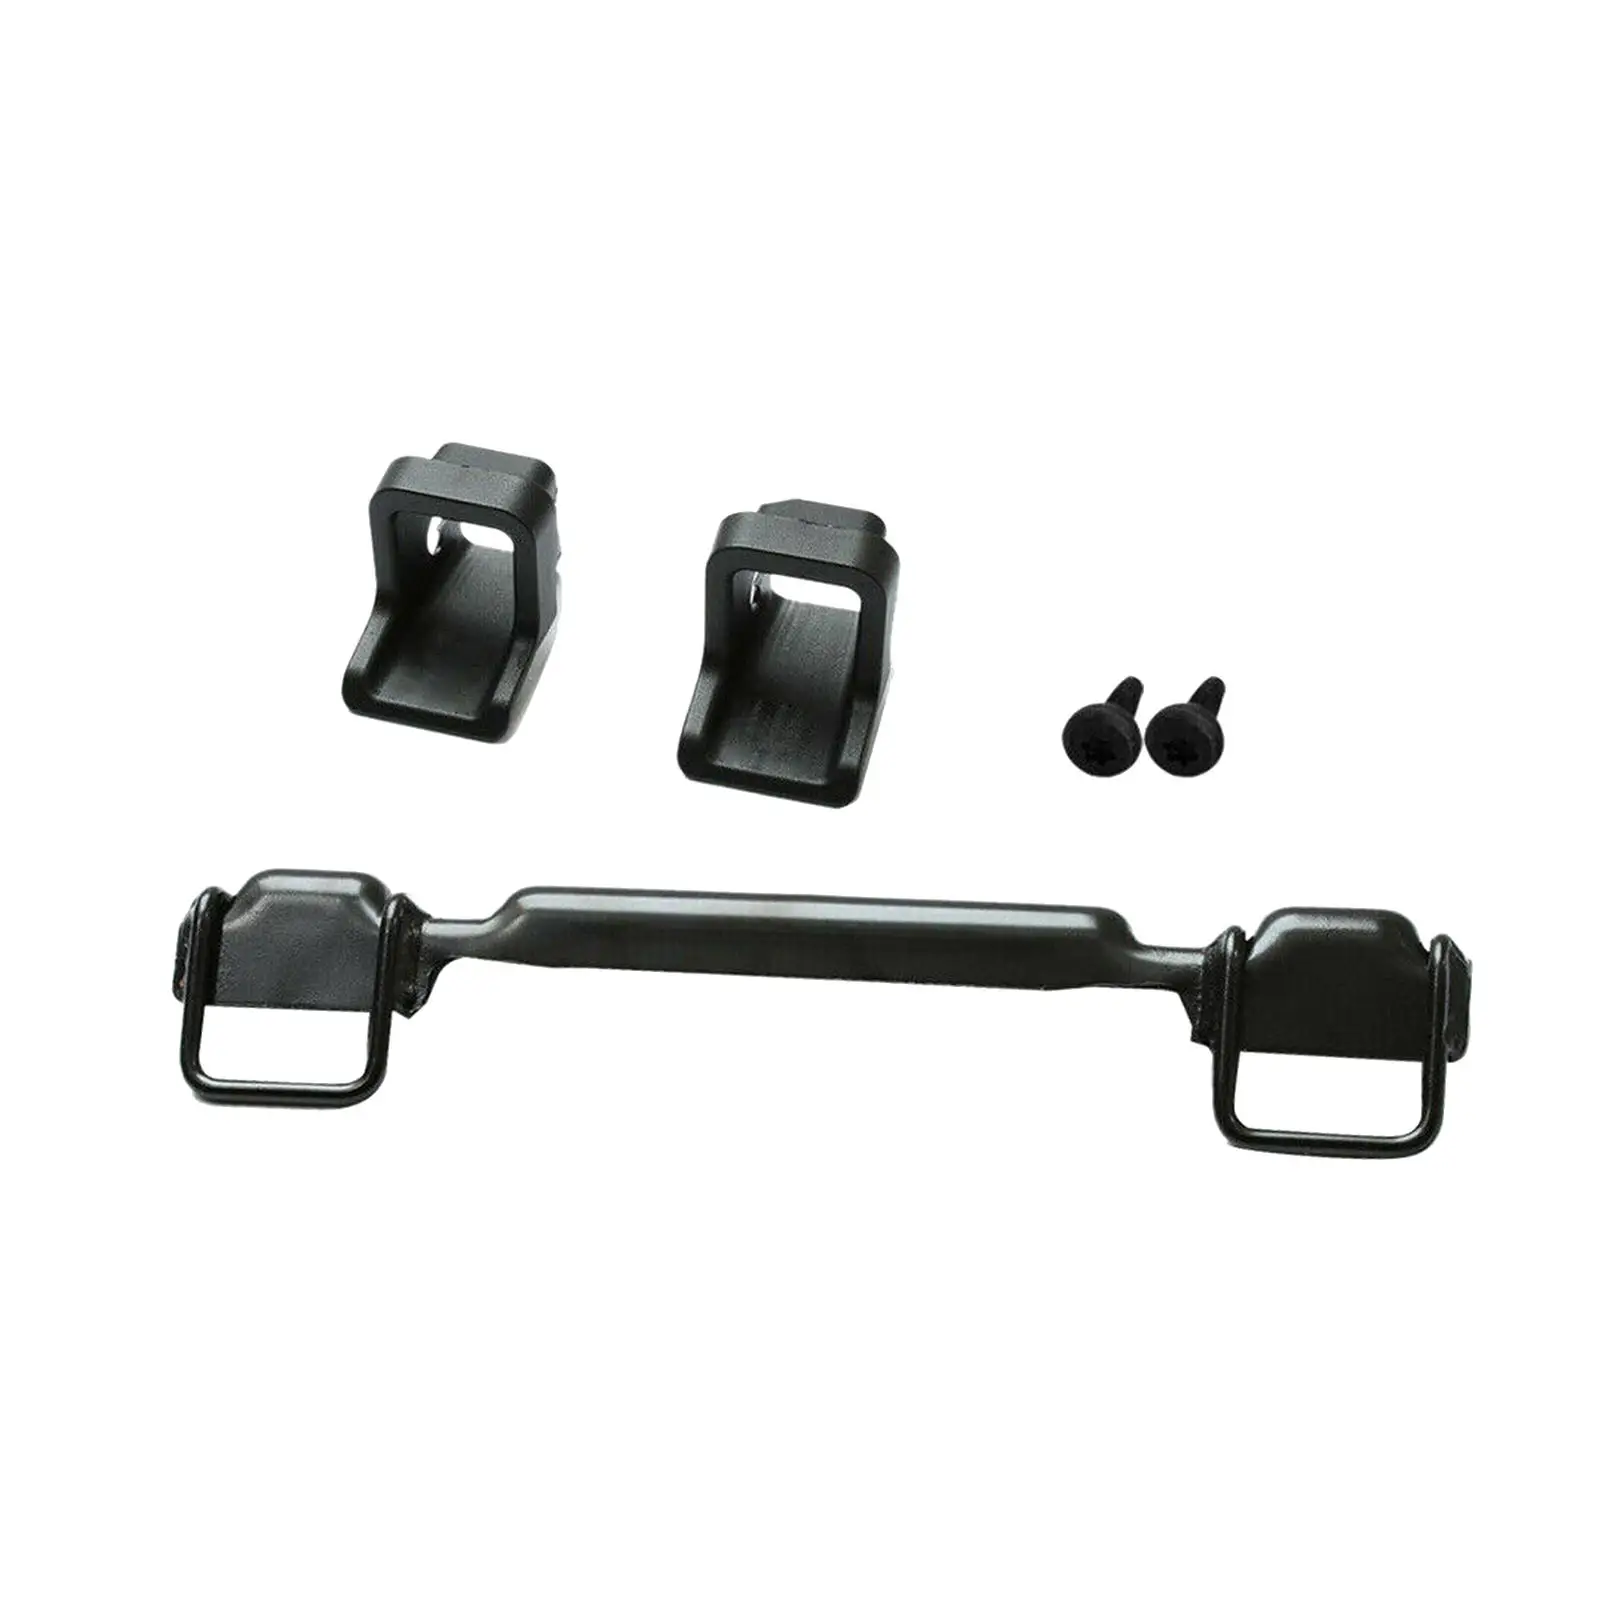 Isofix Latch Connector Black Seat Mount Bracket Child Restraint Anchor Mounting Kit for Ford Focus MK2 05-2010 1357238